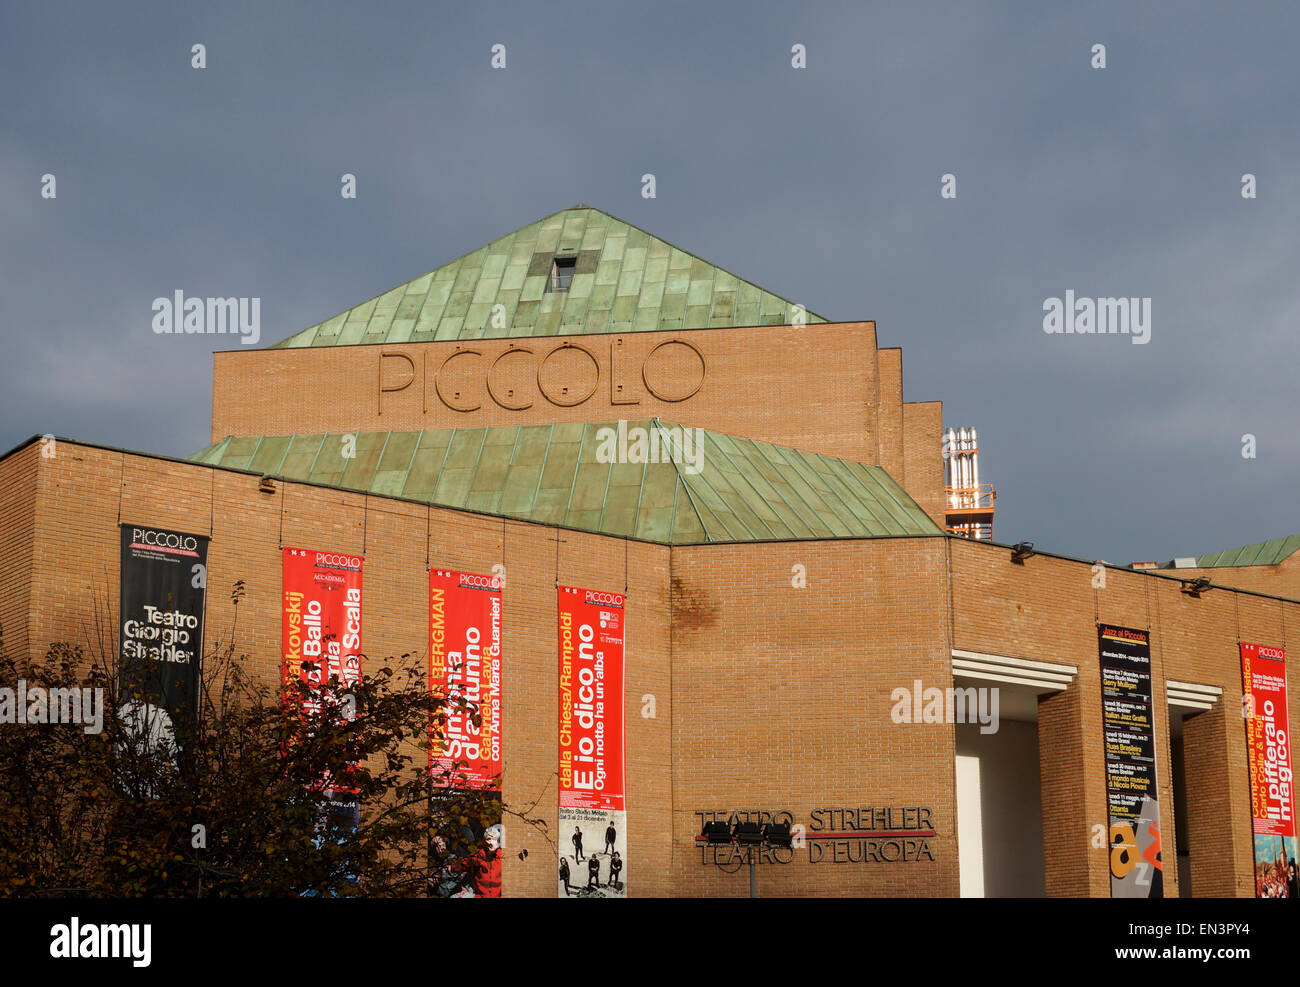 Piccolo teatro strehler hi-res stock photography and images - Alamy